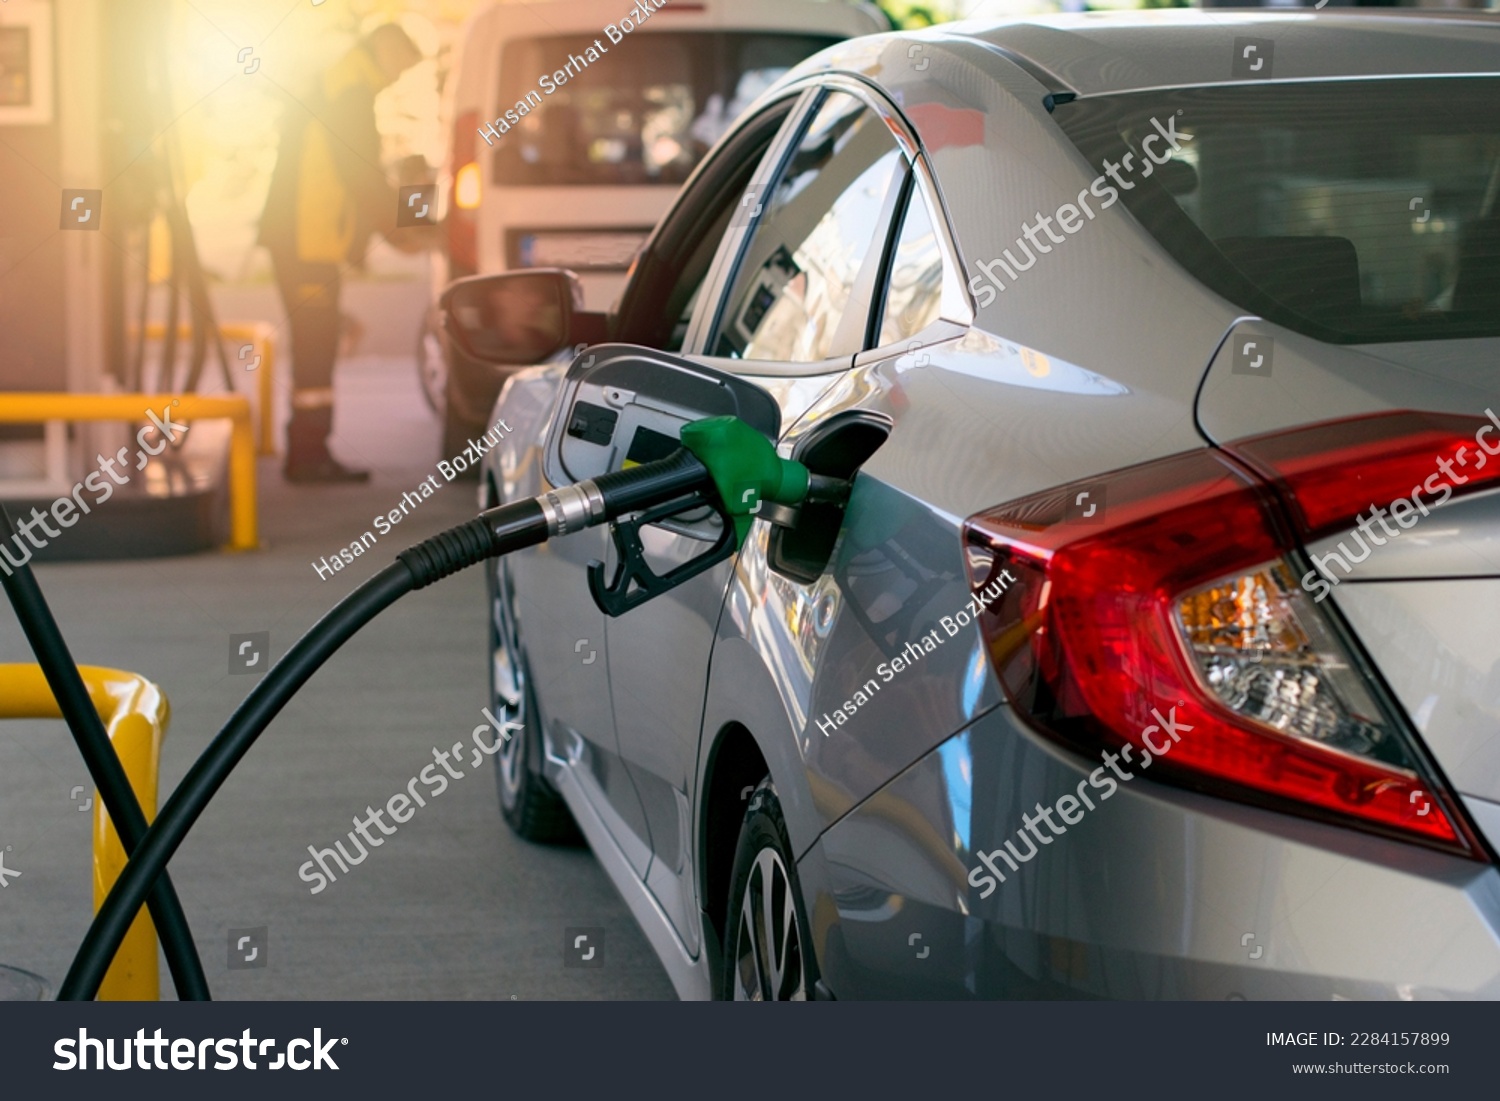 Refuel cars at the fuel pump. The driver hands, refuel and pump the car's gasoline with fuel at the petrol station. Car refueling at a gas station. #2284157899